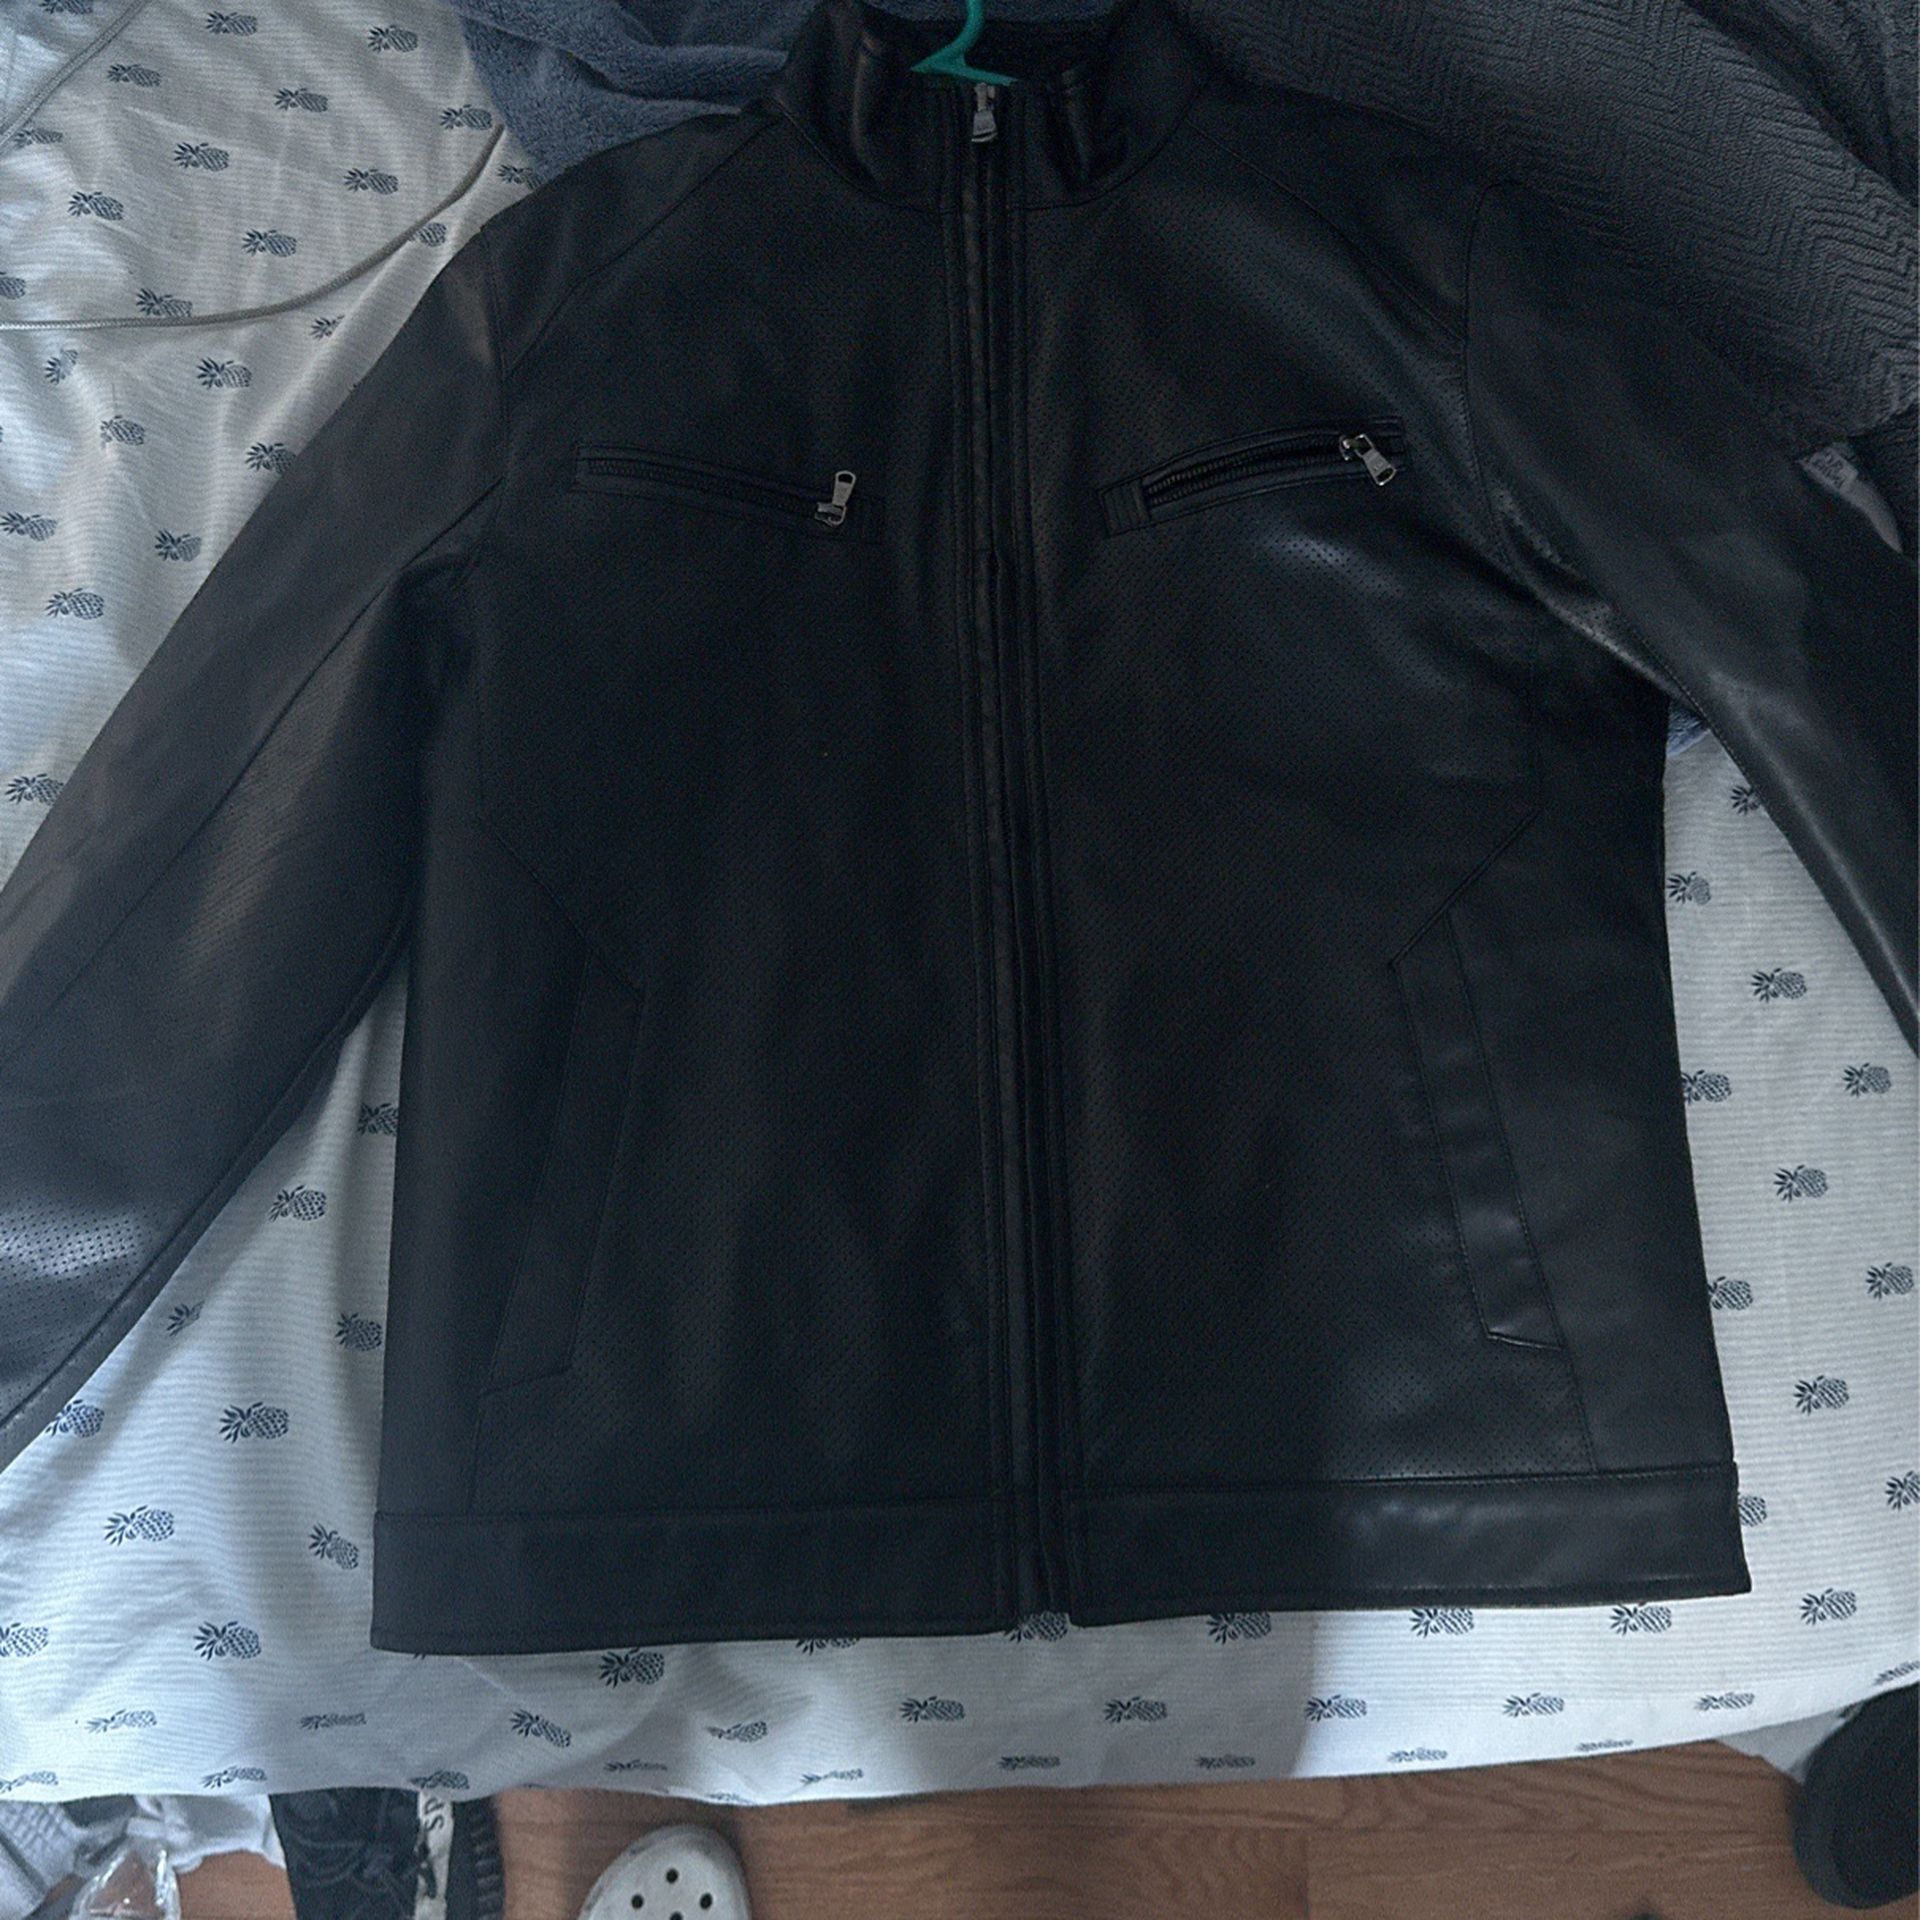 Micheal Kors Leather Jacket Size M (up For Offers)